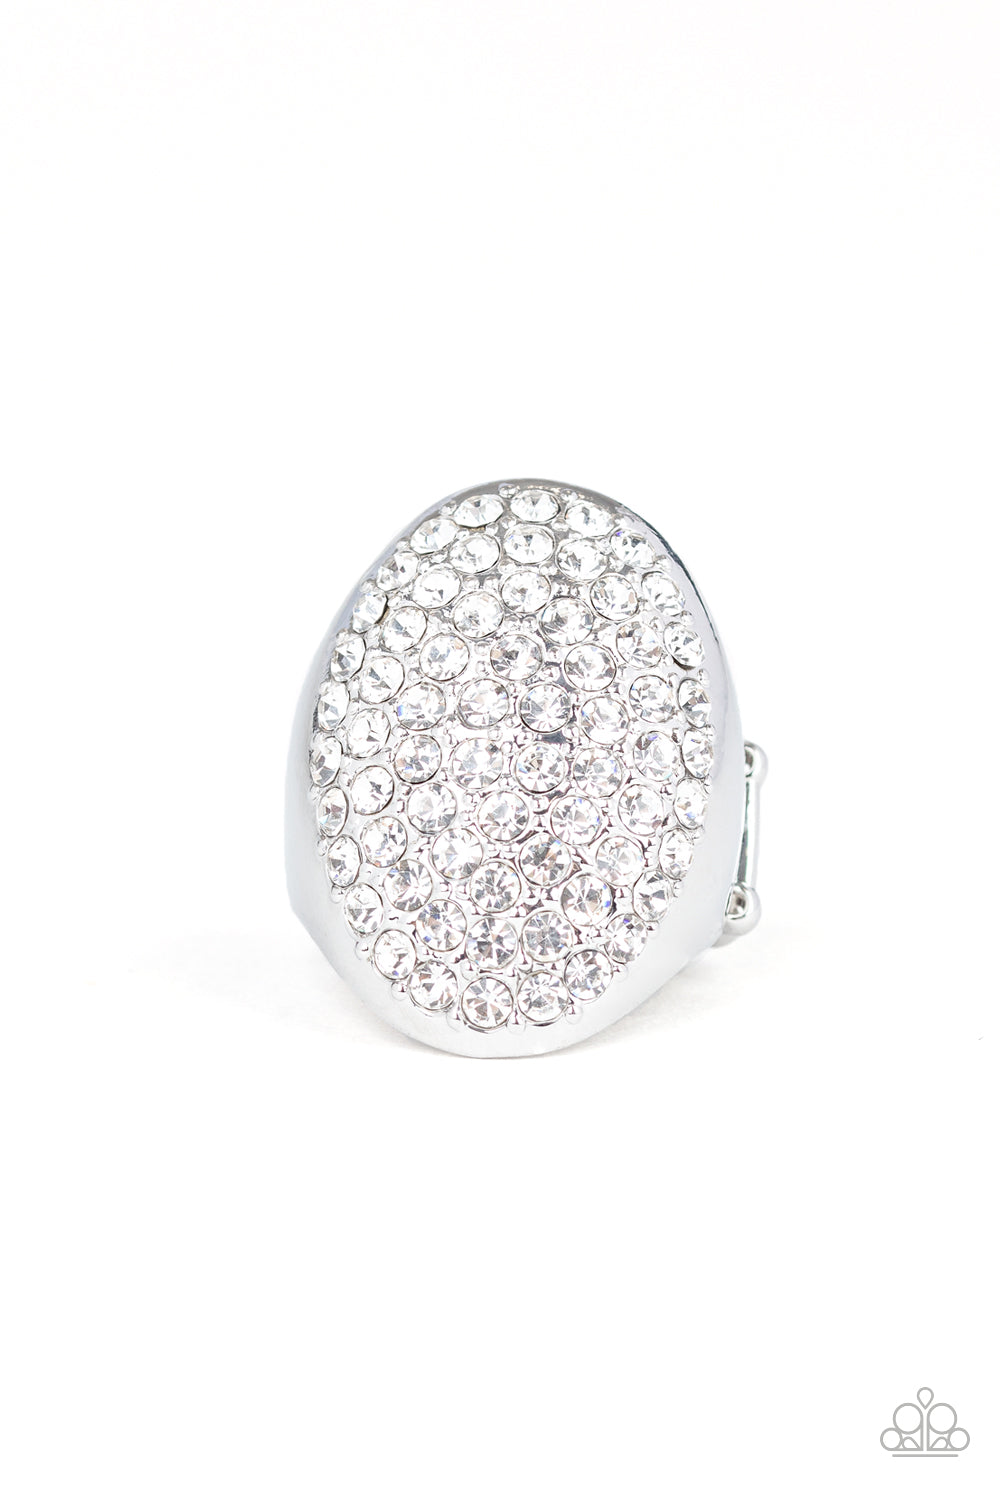 Row after row of dazzling white rhinestones radiate out from the center of a thick silver frame, creating a blinding centerpiece atop the finger. Features a stretchy band for a flexible fit.  Sold as one individual ring.